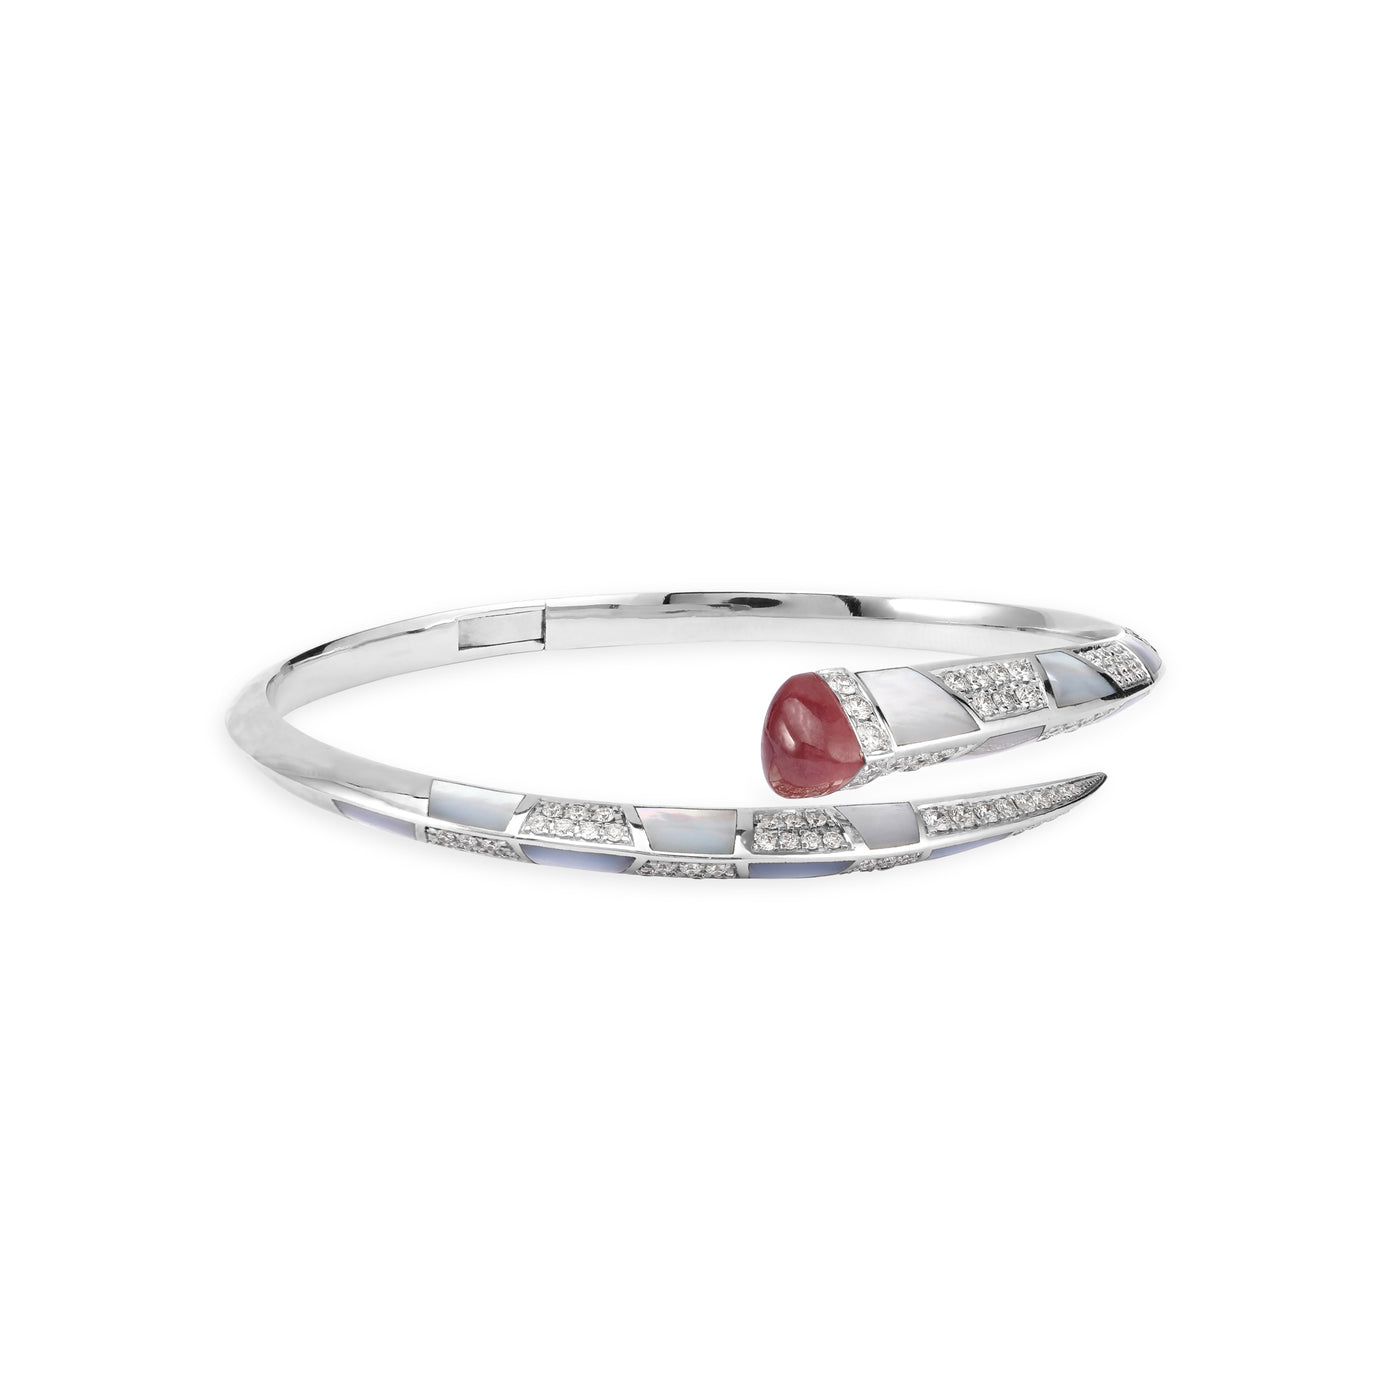 Soit Belle Signature White Gold Diamond Bangle With Natural Ruby